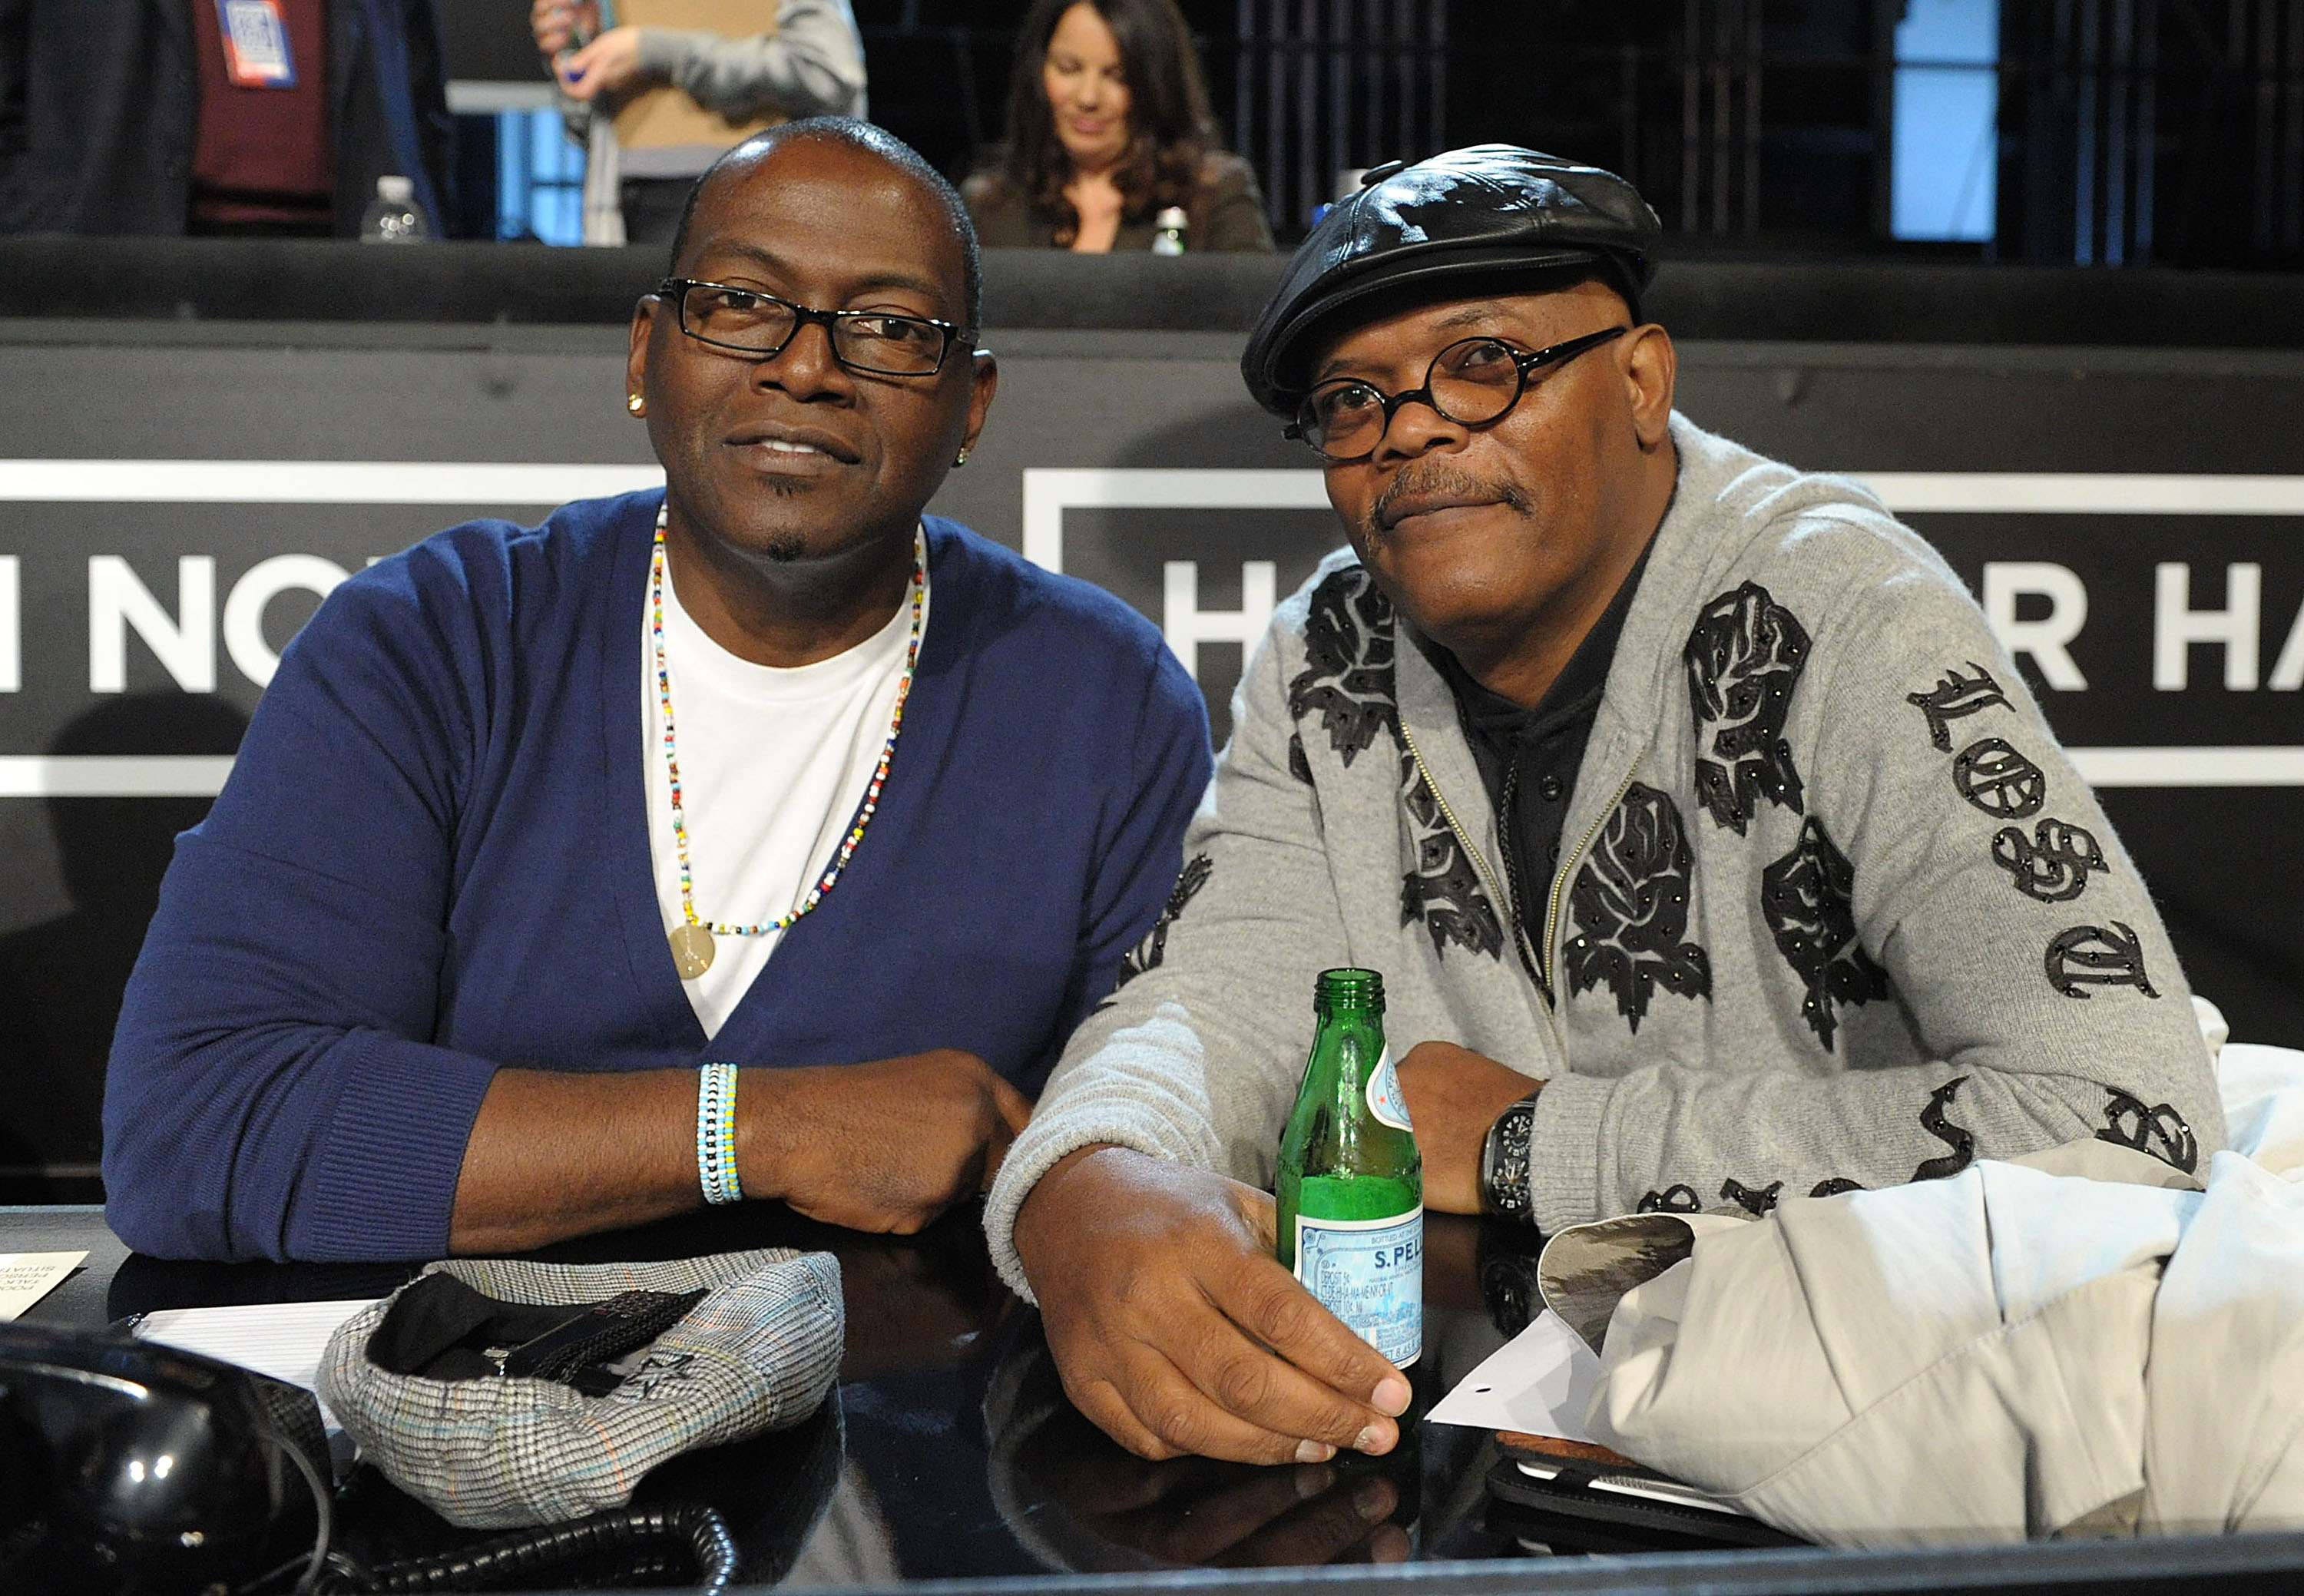 In this image released by Hope for Haiti Now, Randy Jackson, left, and actor Samuel L. Jackson are shown at "Hope for Haiti Now: A Global Benefit for Earthquake Relief", on Friday, Jan. 22, 2010, in Los Angeles. (AP Photo/Mark Davis, Hope for Haiti Now)